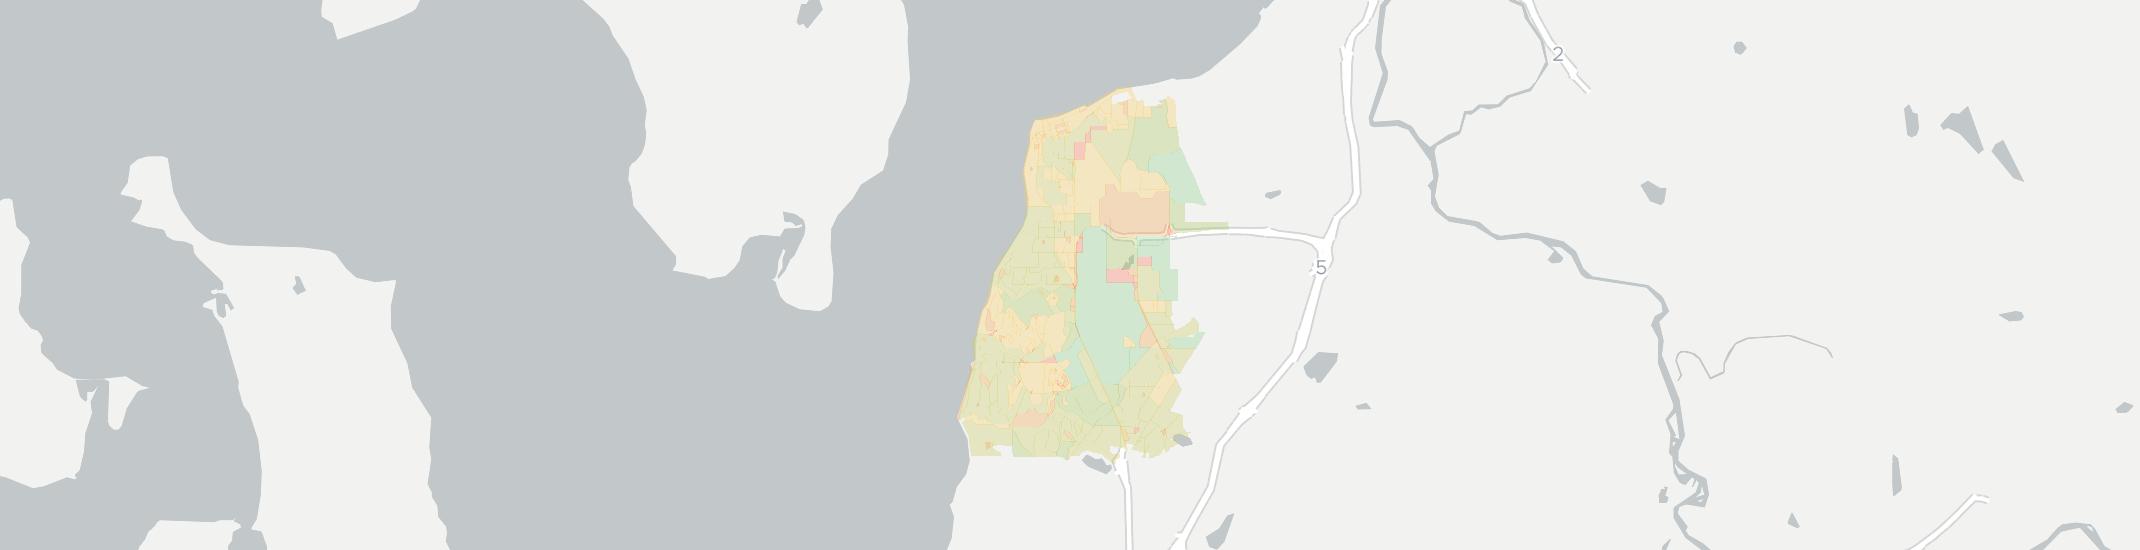 Mukilteo Internet Competition Map. Click for interactive map.